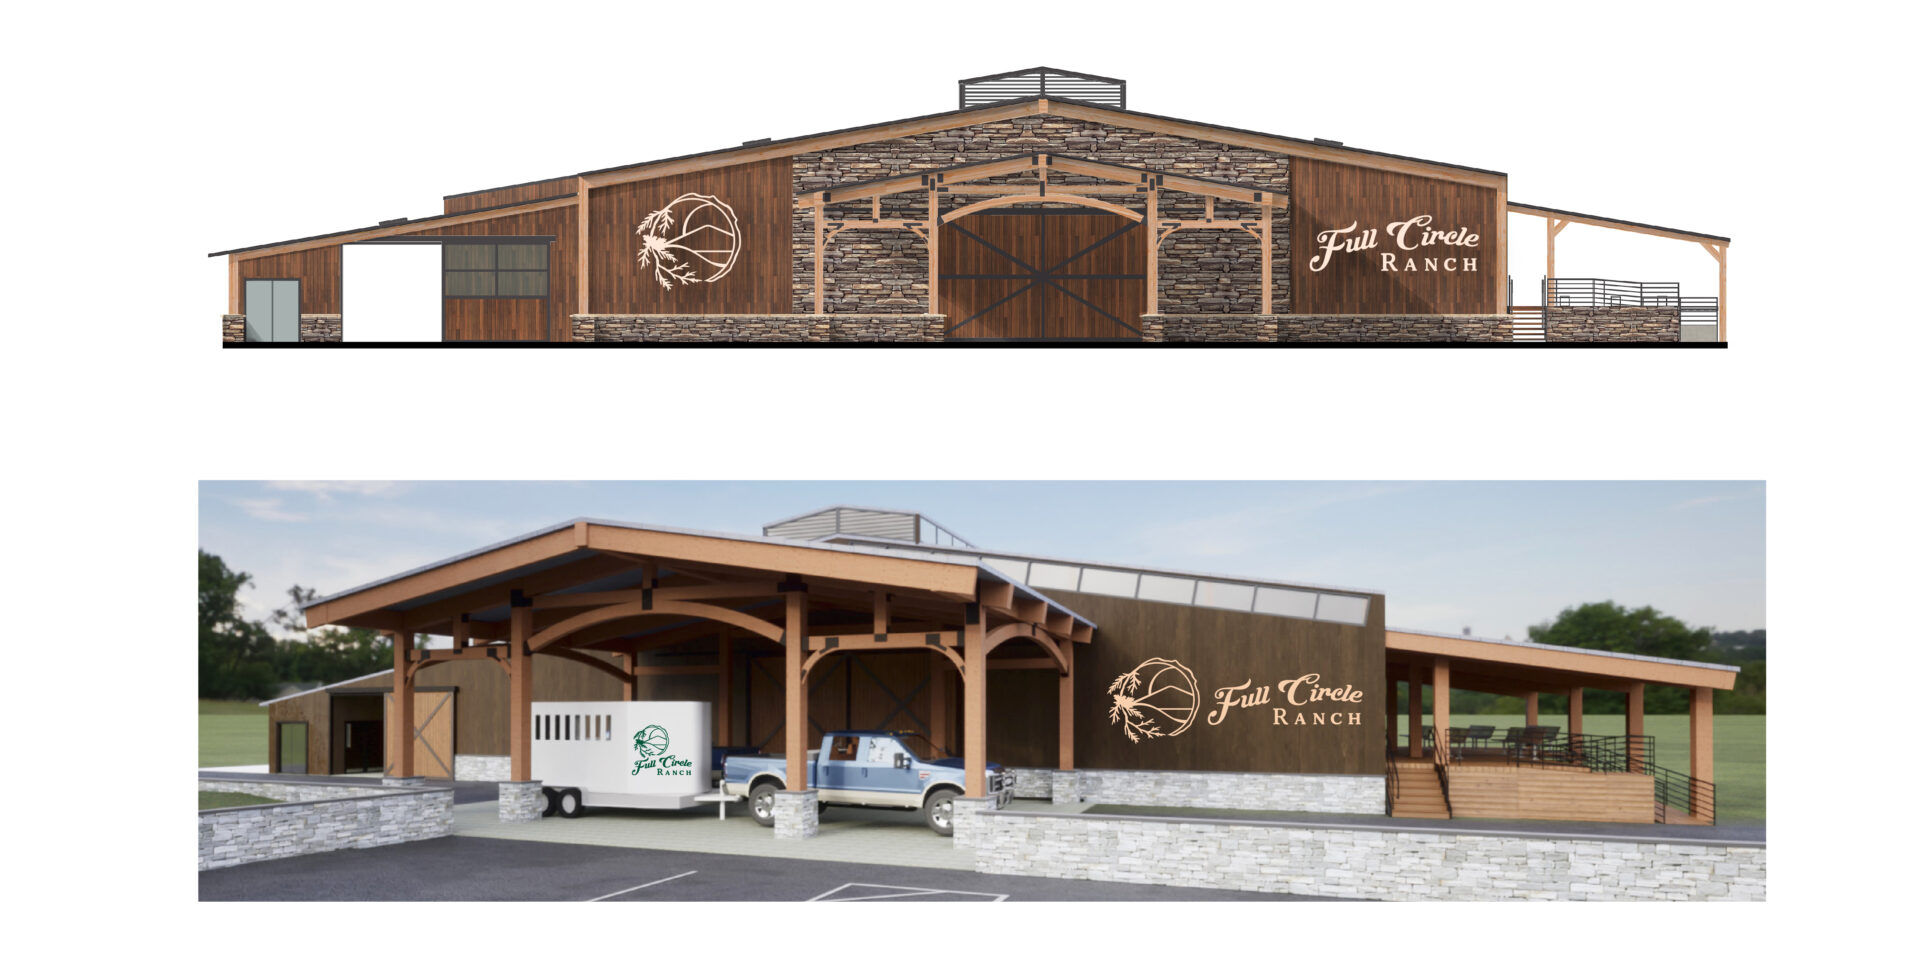 Logo mockups of Full Circle Ranch on their stable renovations renders and trailer